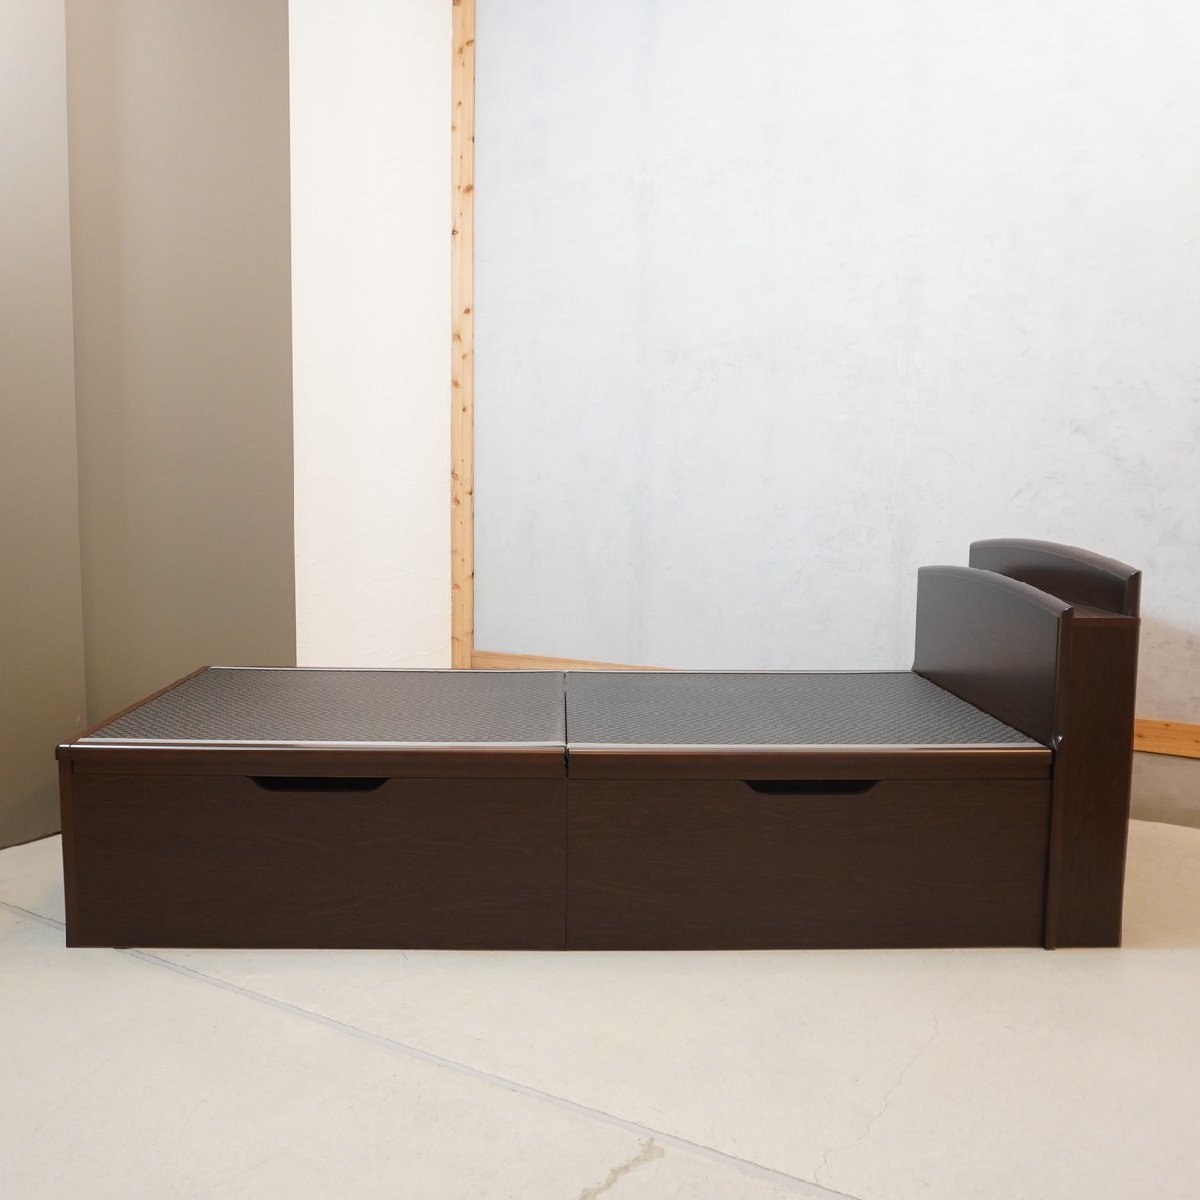 dinostinos tip-up type storage attaching bed tatami made in Japan storage single bed frame simple peace . outlet attaching peace modern DK410